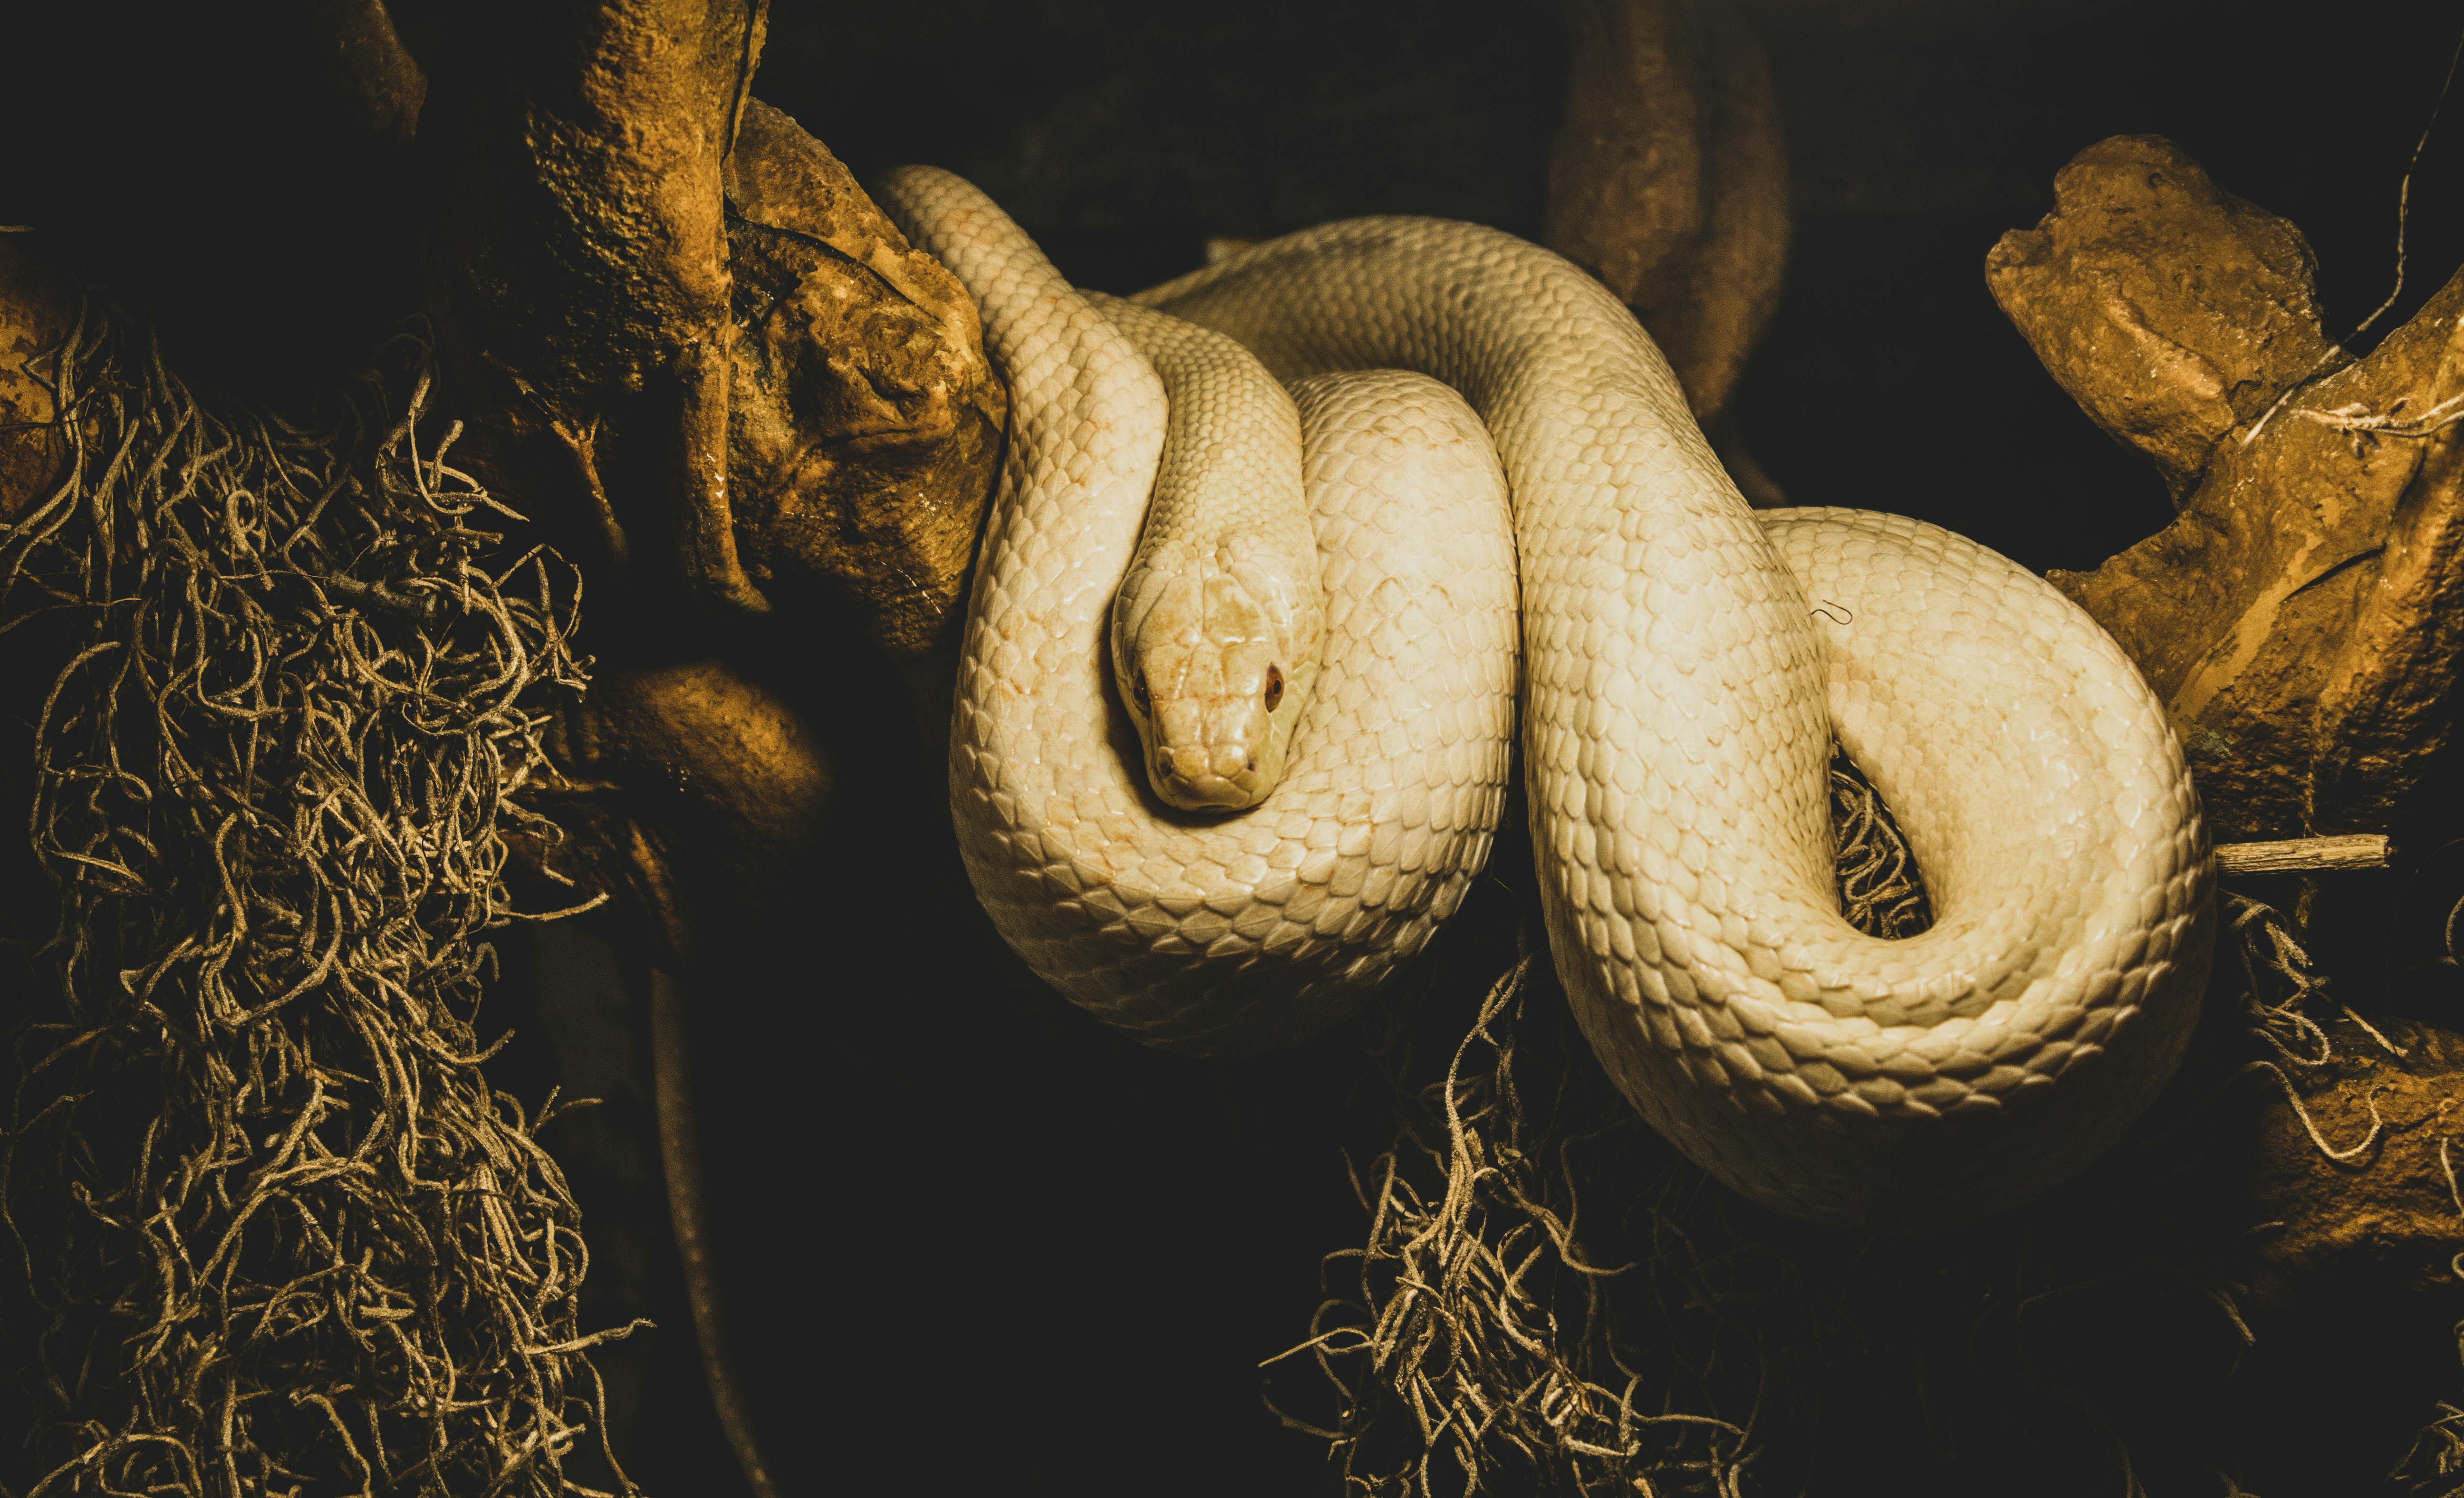 Snake Photos, Download The BEST Free Snake Stock Photos & HD Images